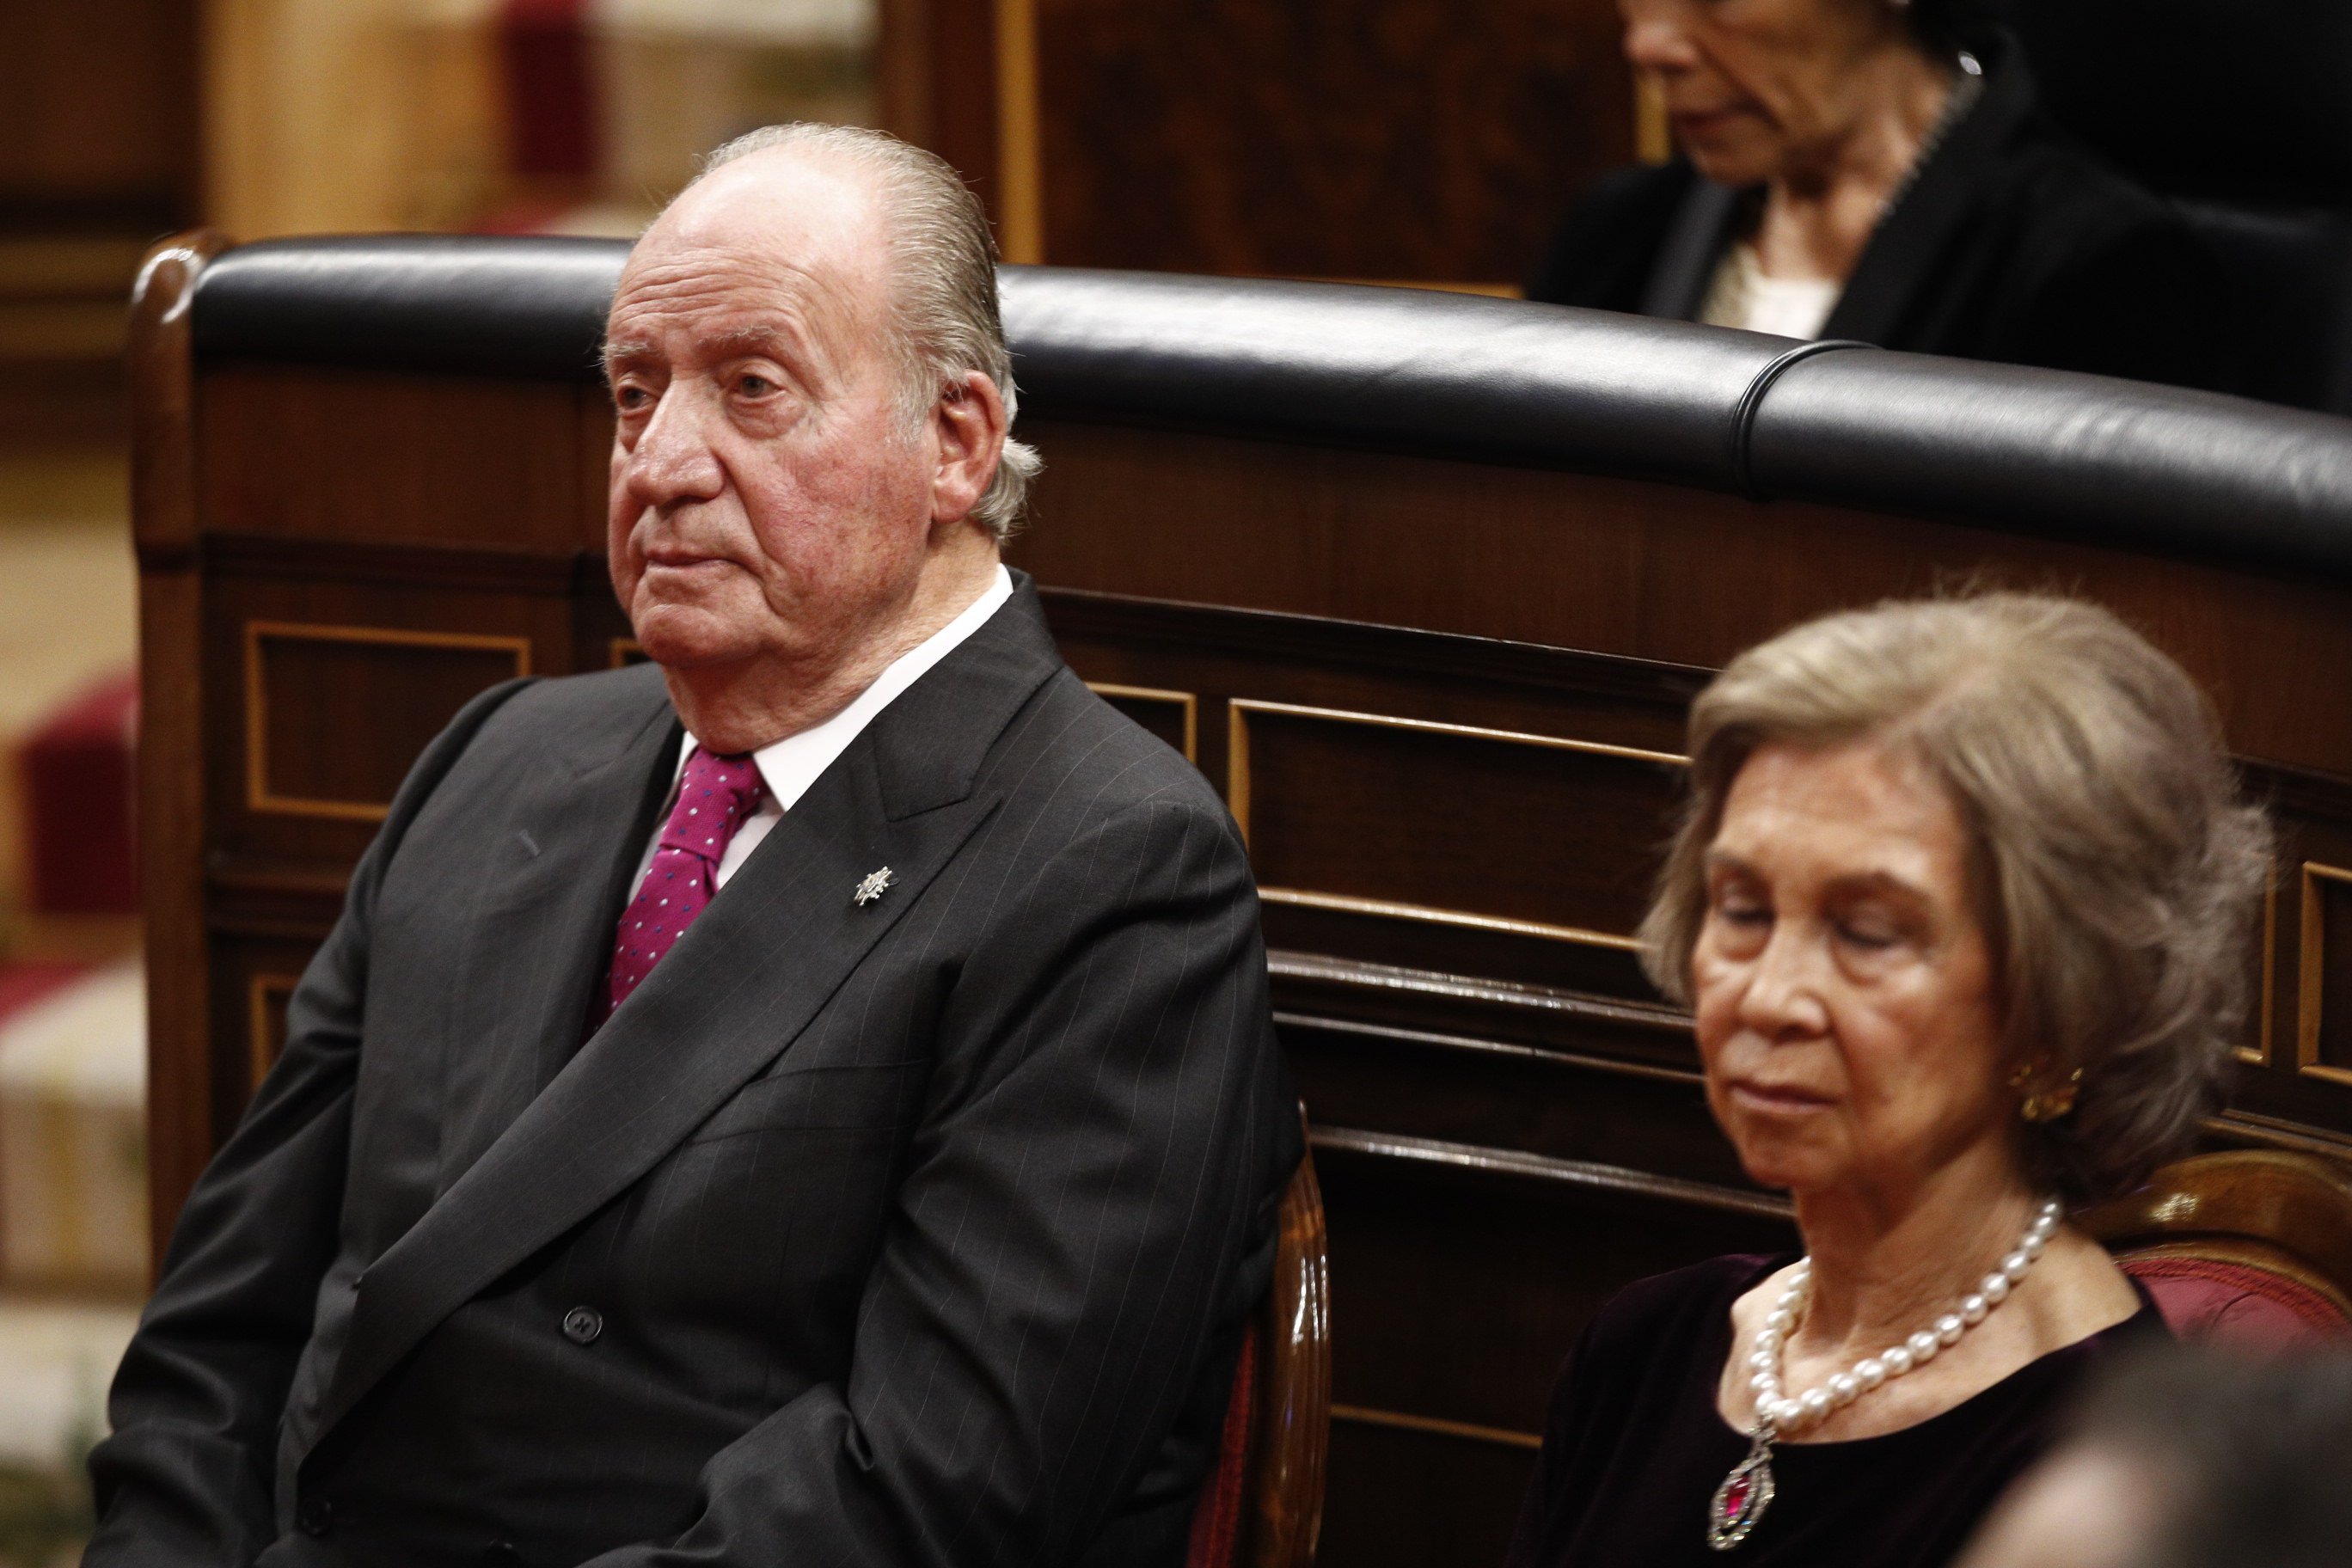 Spain's Juan Carlos I spent National Heritage funds on treating his lovers